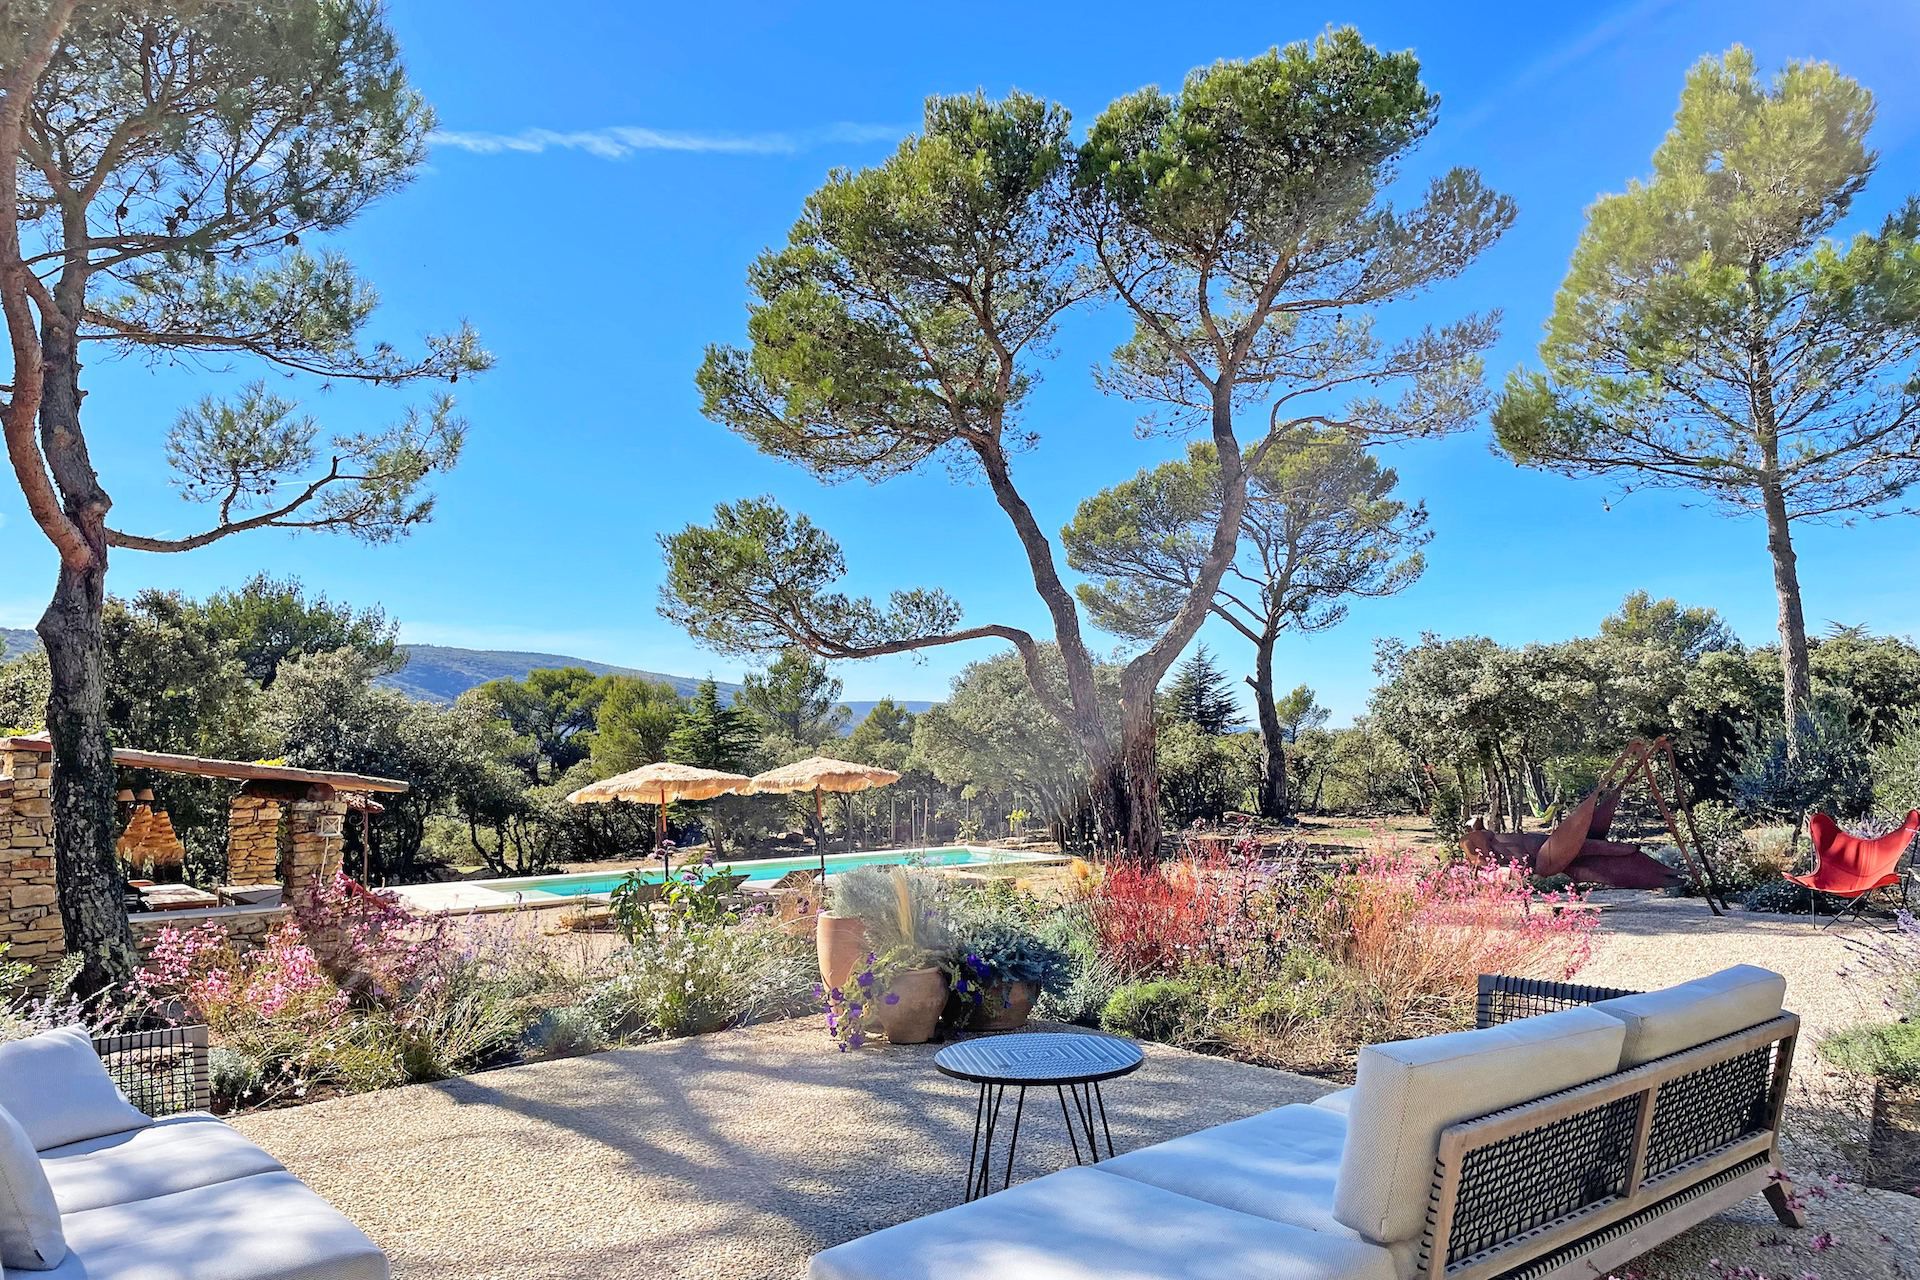 Méditerranée Location House with Private pool in Bonnieux, Provence